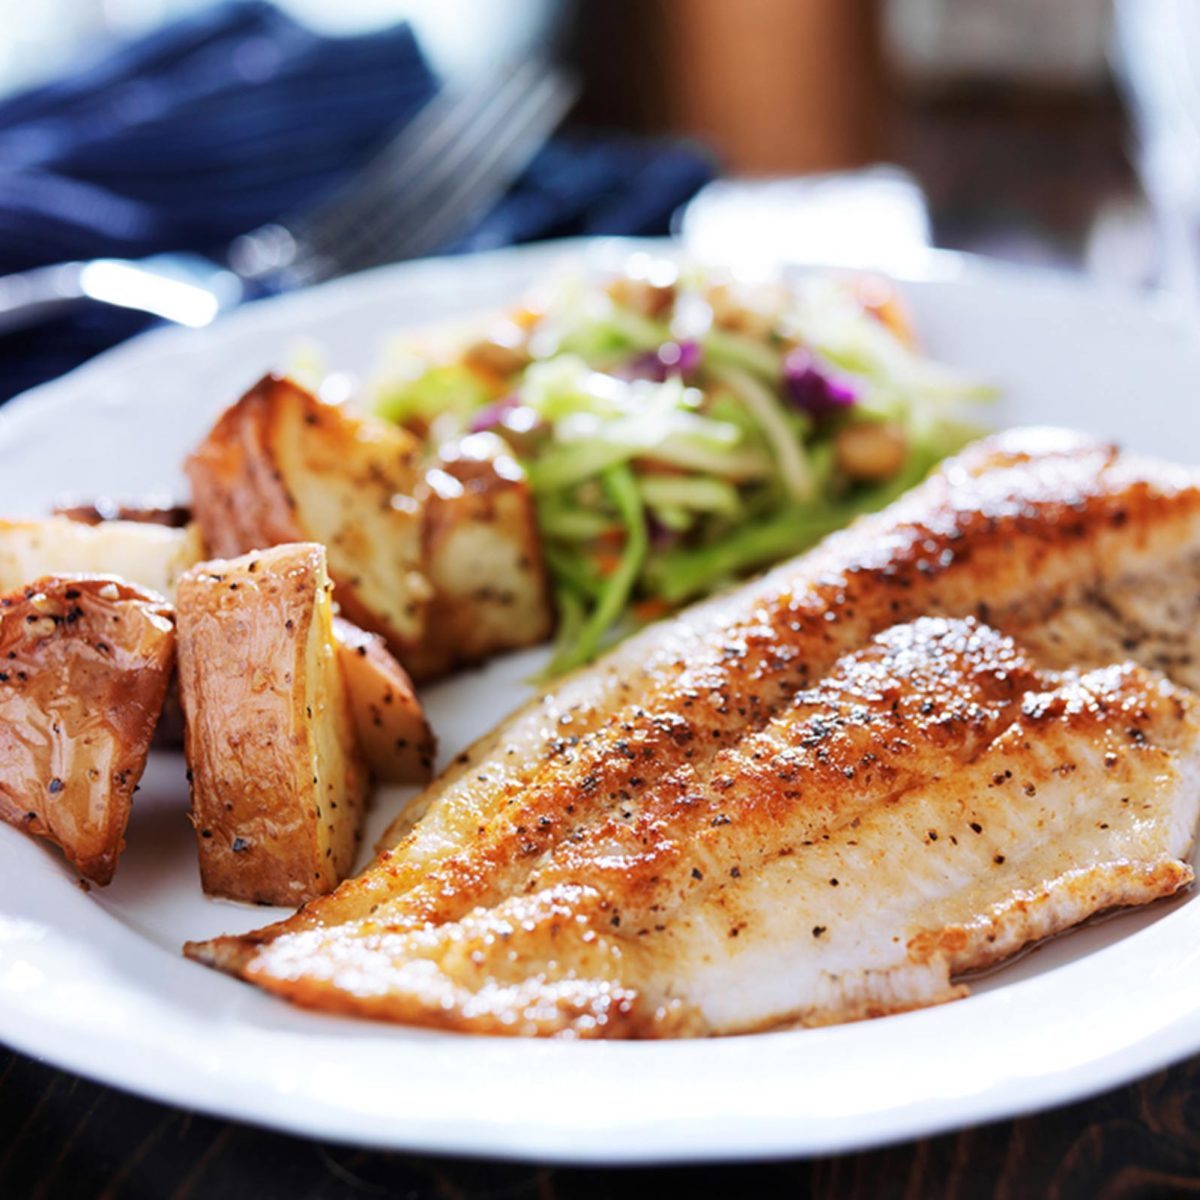 8 Fish You Should Never Order at a Restaurant